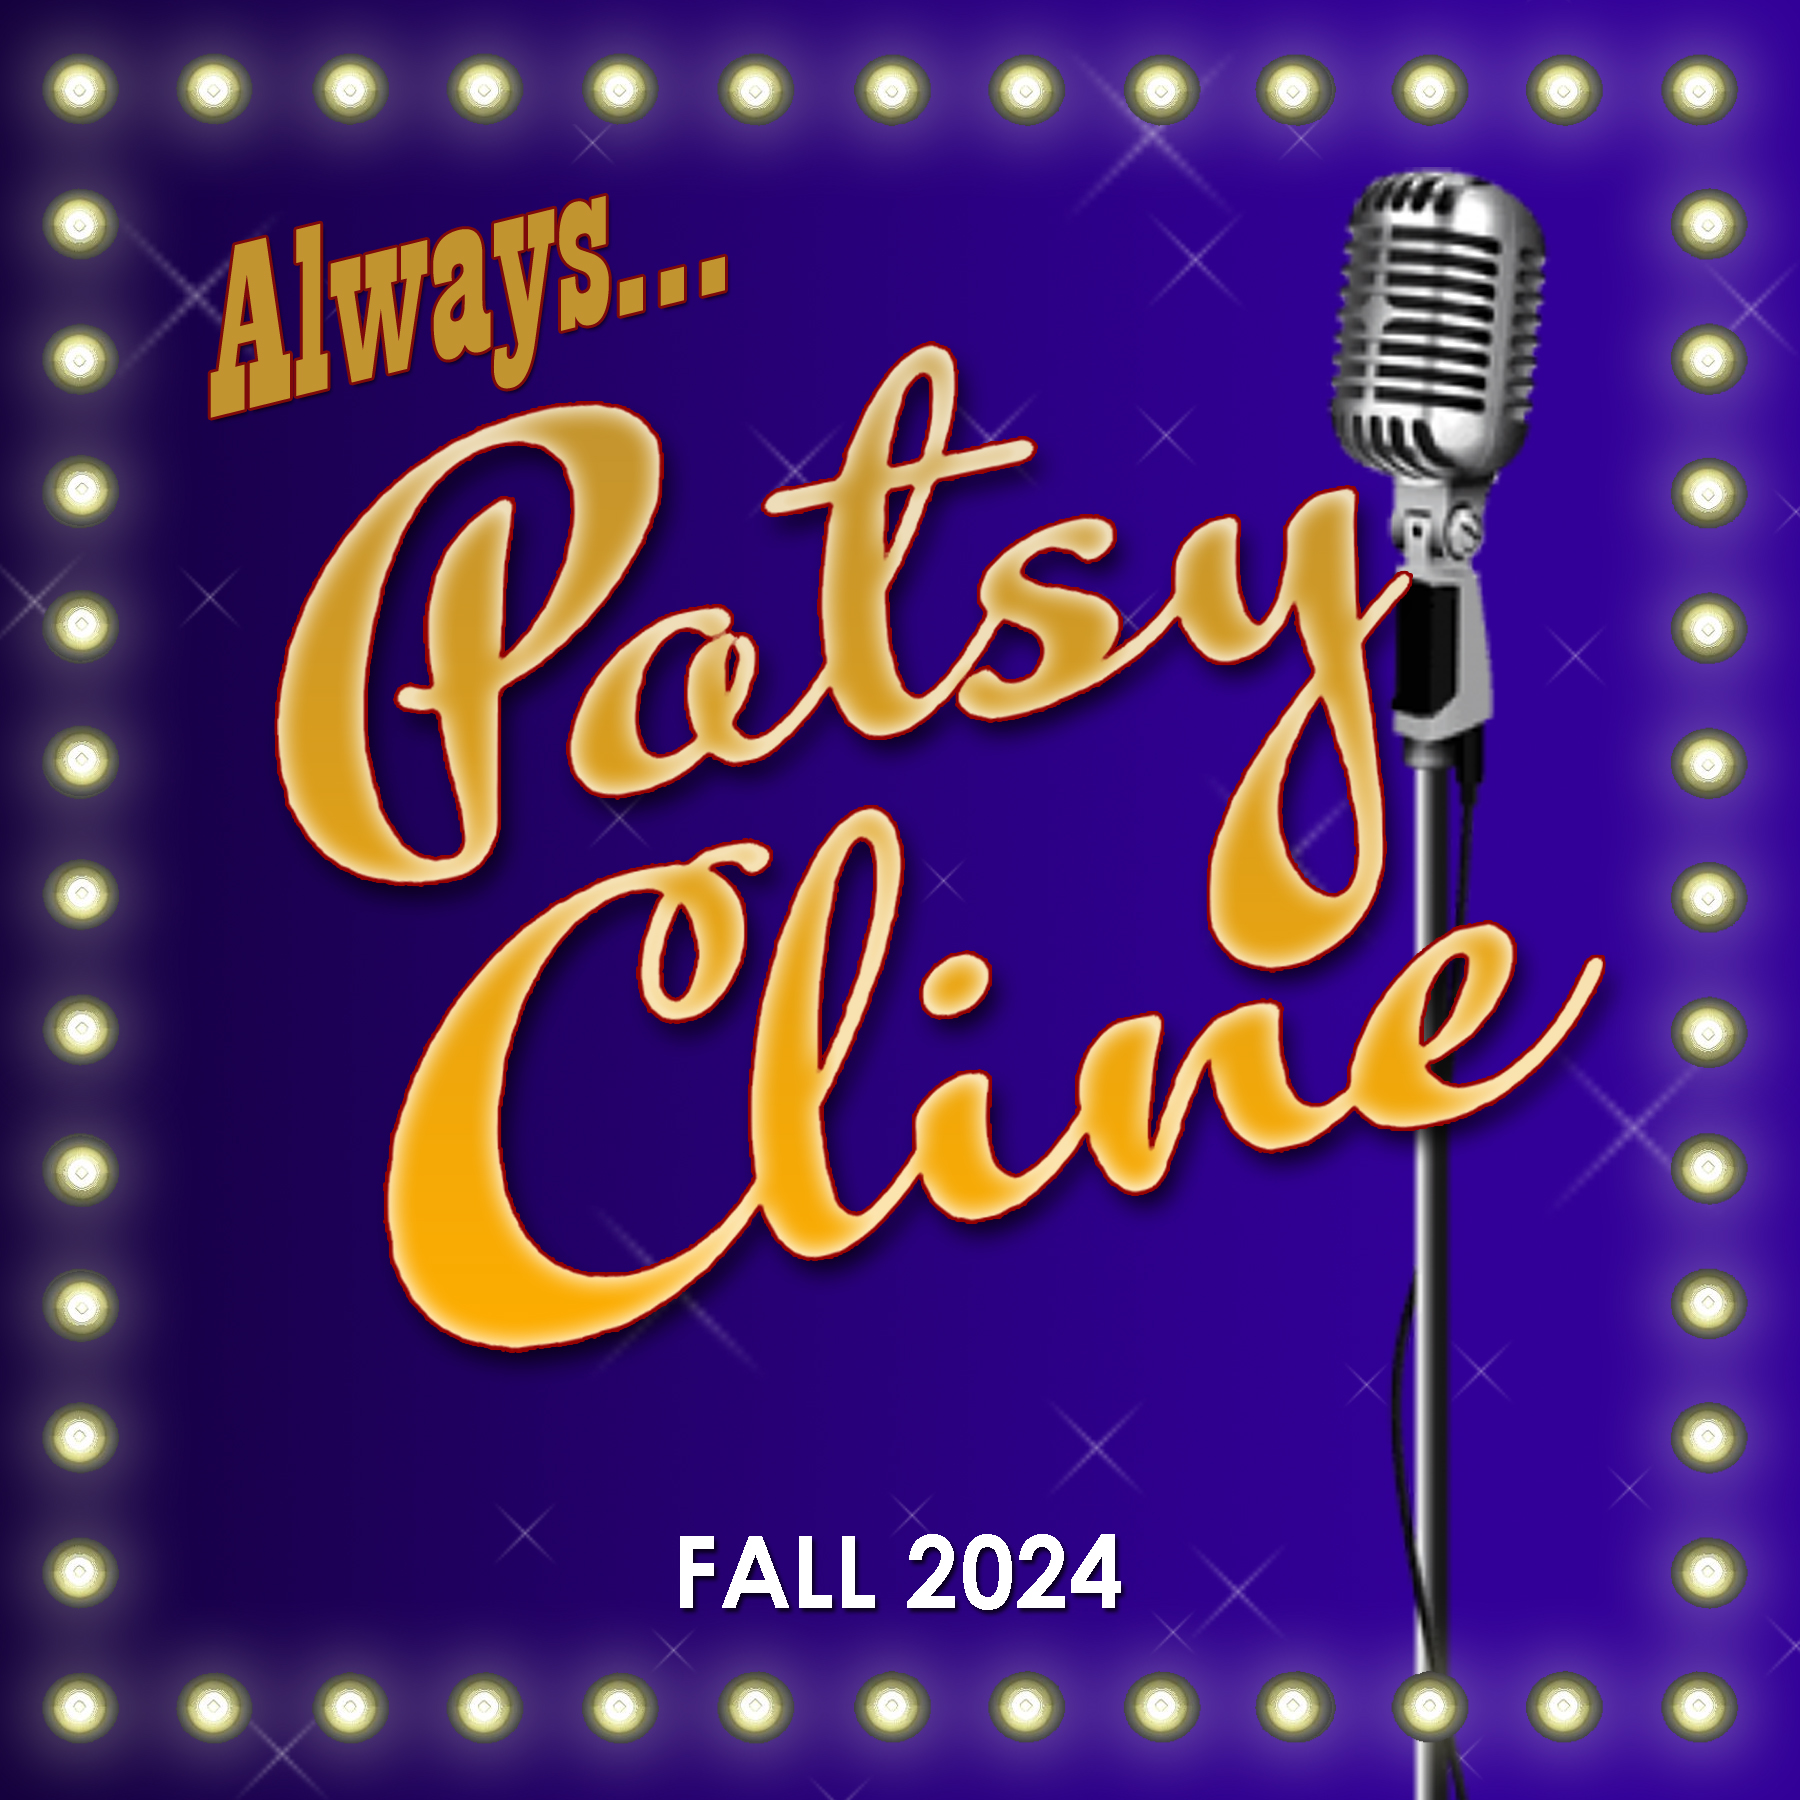 Always, Patsy Cline at the Pines Dinner Theatre